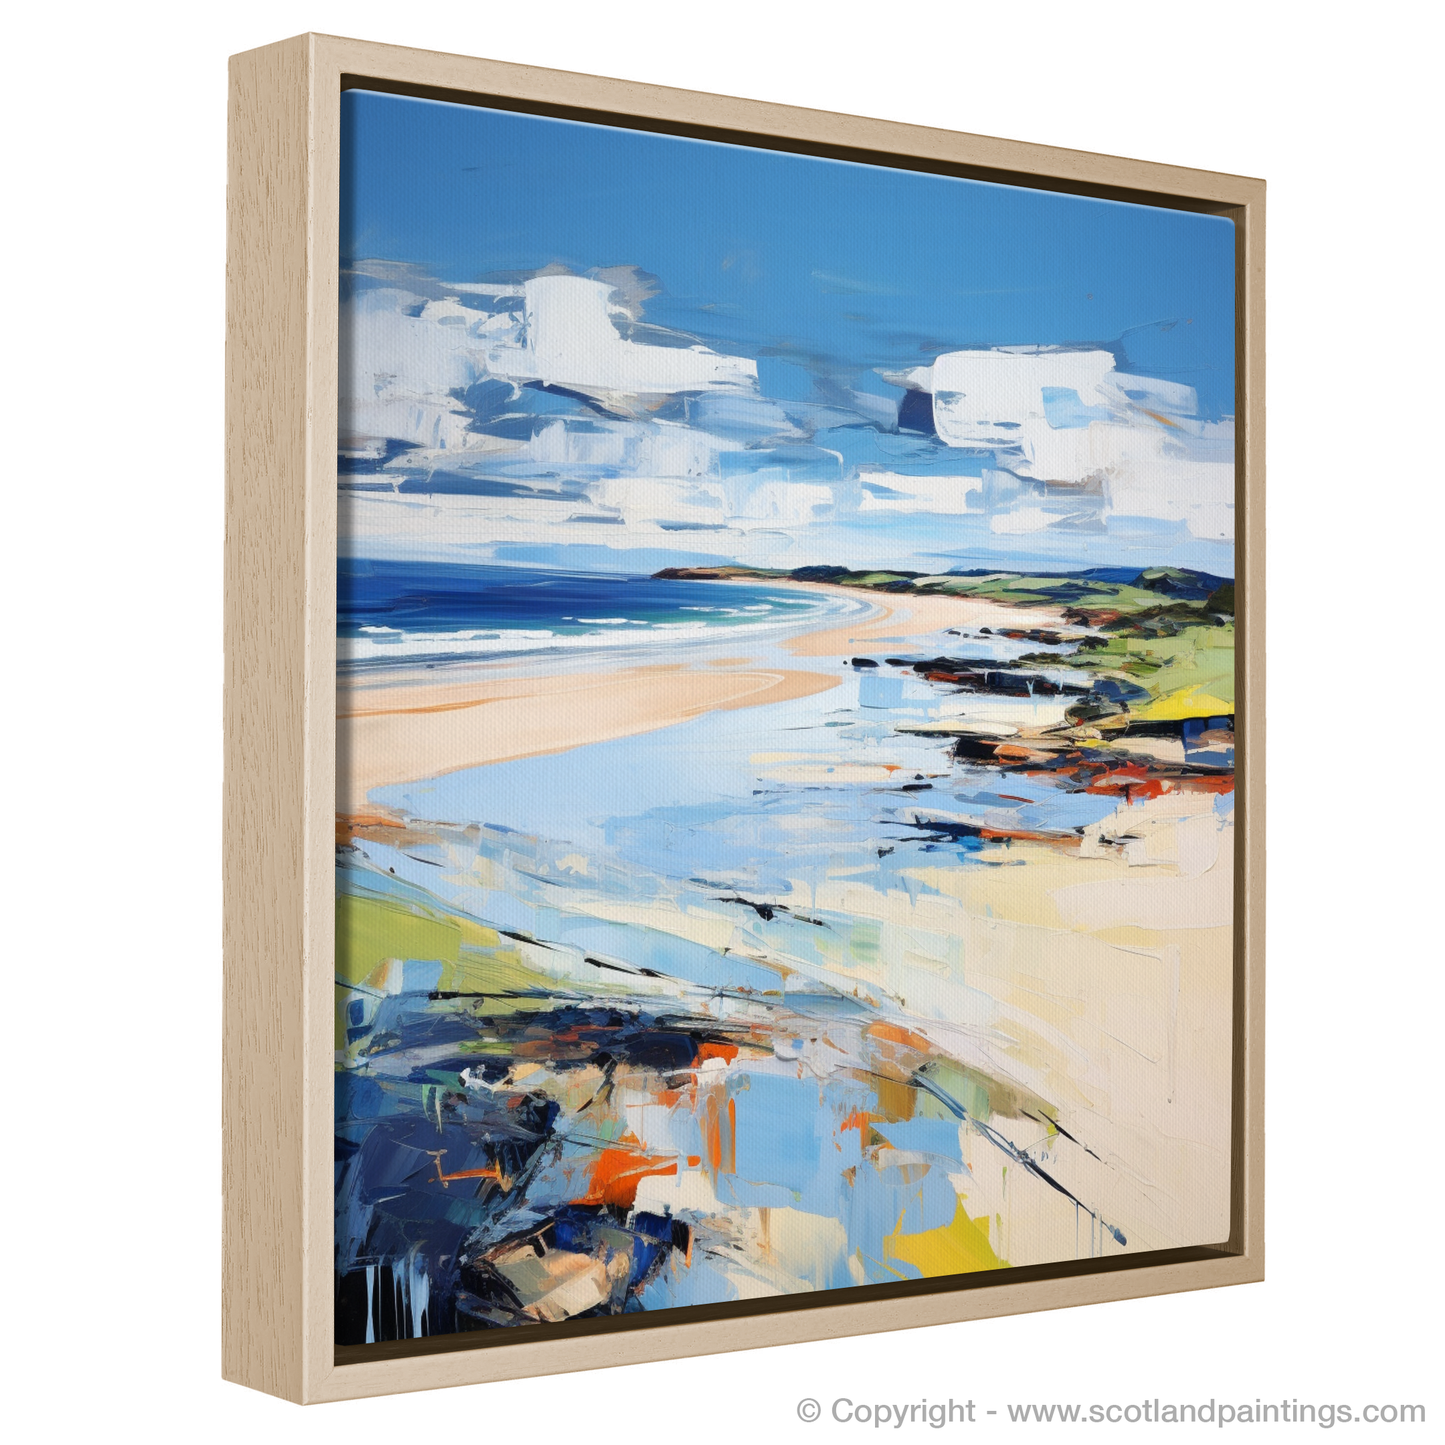 Painting and Art Print of West Sands, St Andrews entitled "West Sands Whispers: An Expressionist Ode to Scotland's Rugged Coastline".